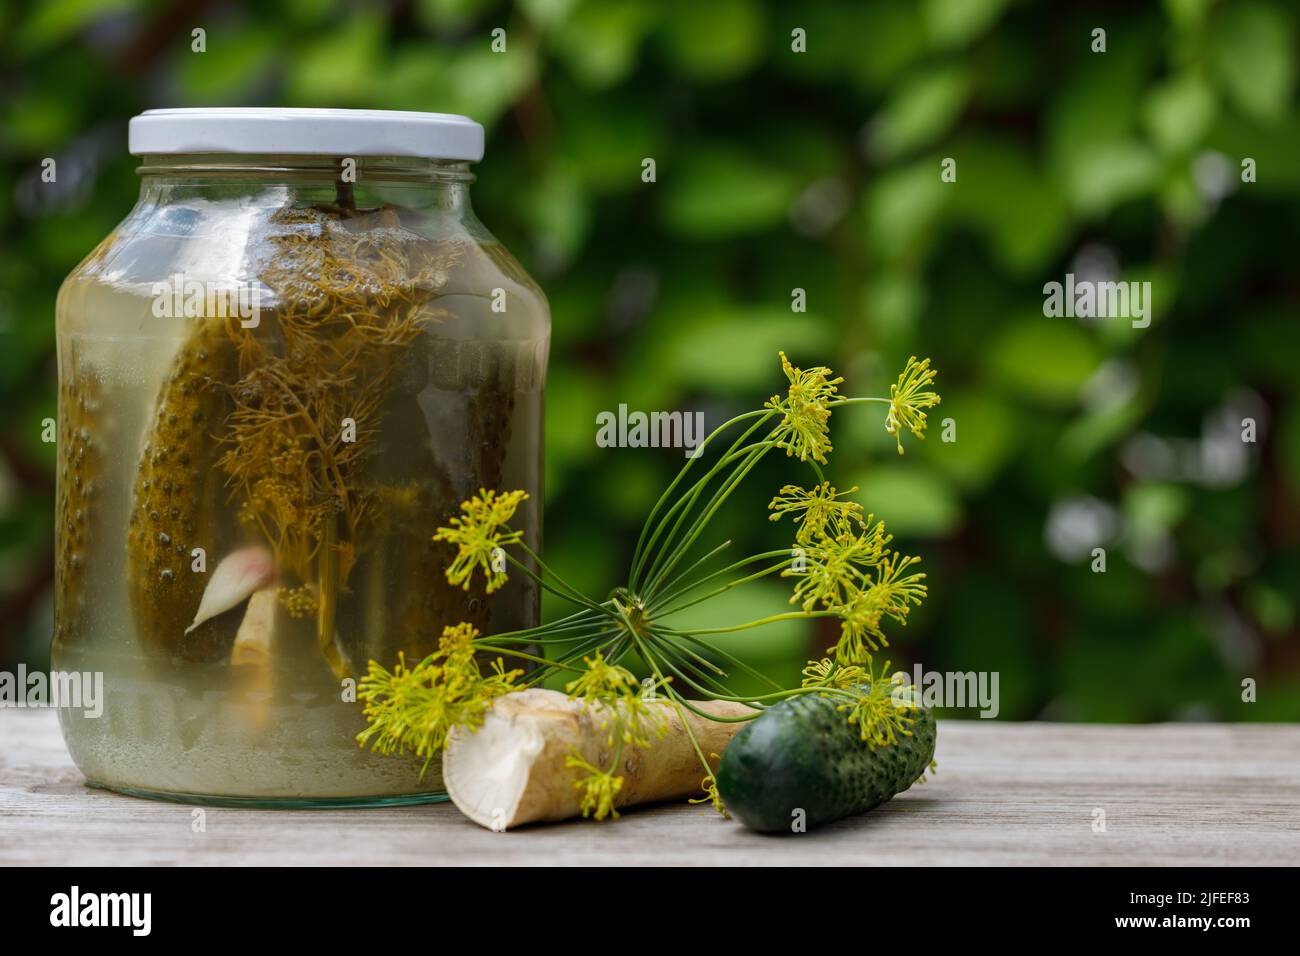 Pickles in a jar on an old wooden table in the garden. A summer sunny day. Cucumber, herbs, dill. Background image, copy space, horizontal. Eye Level Stock Photo